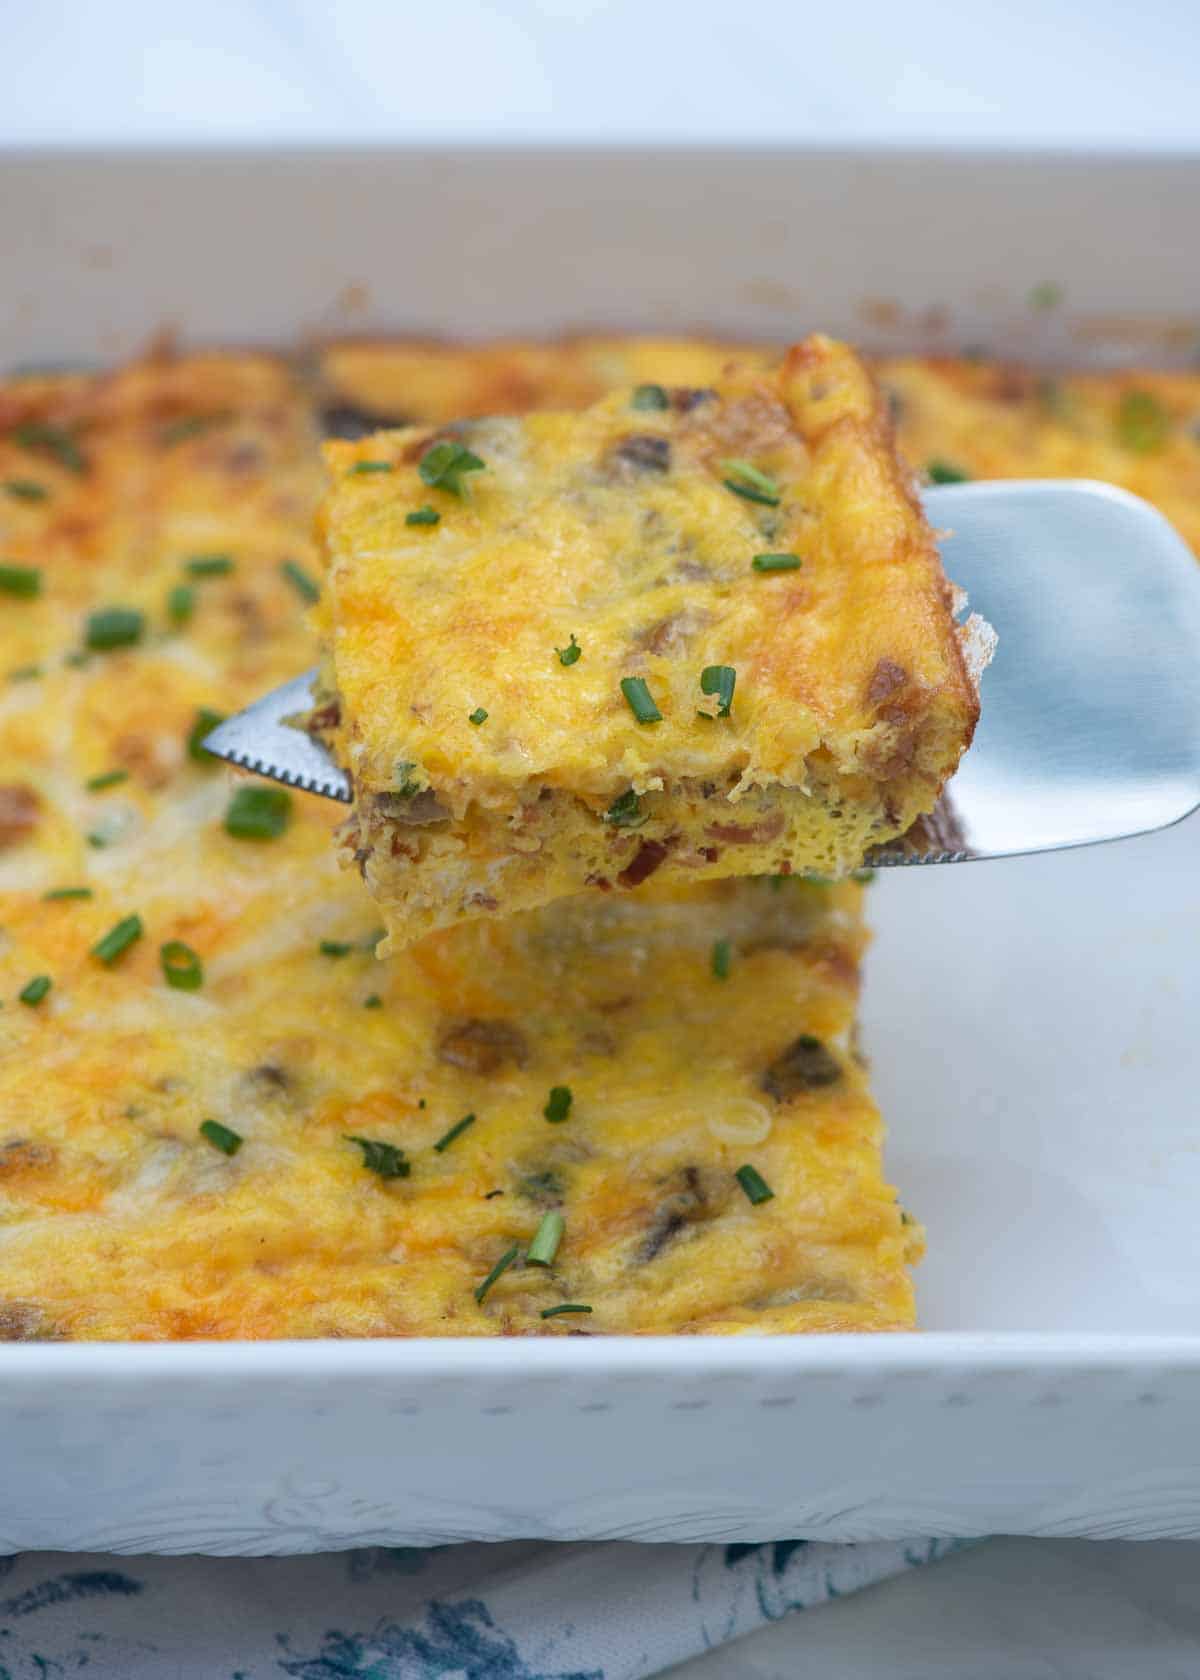 A spatula lifting a slice of crustless quiche from a baking dish.